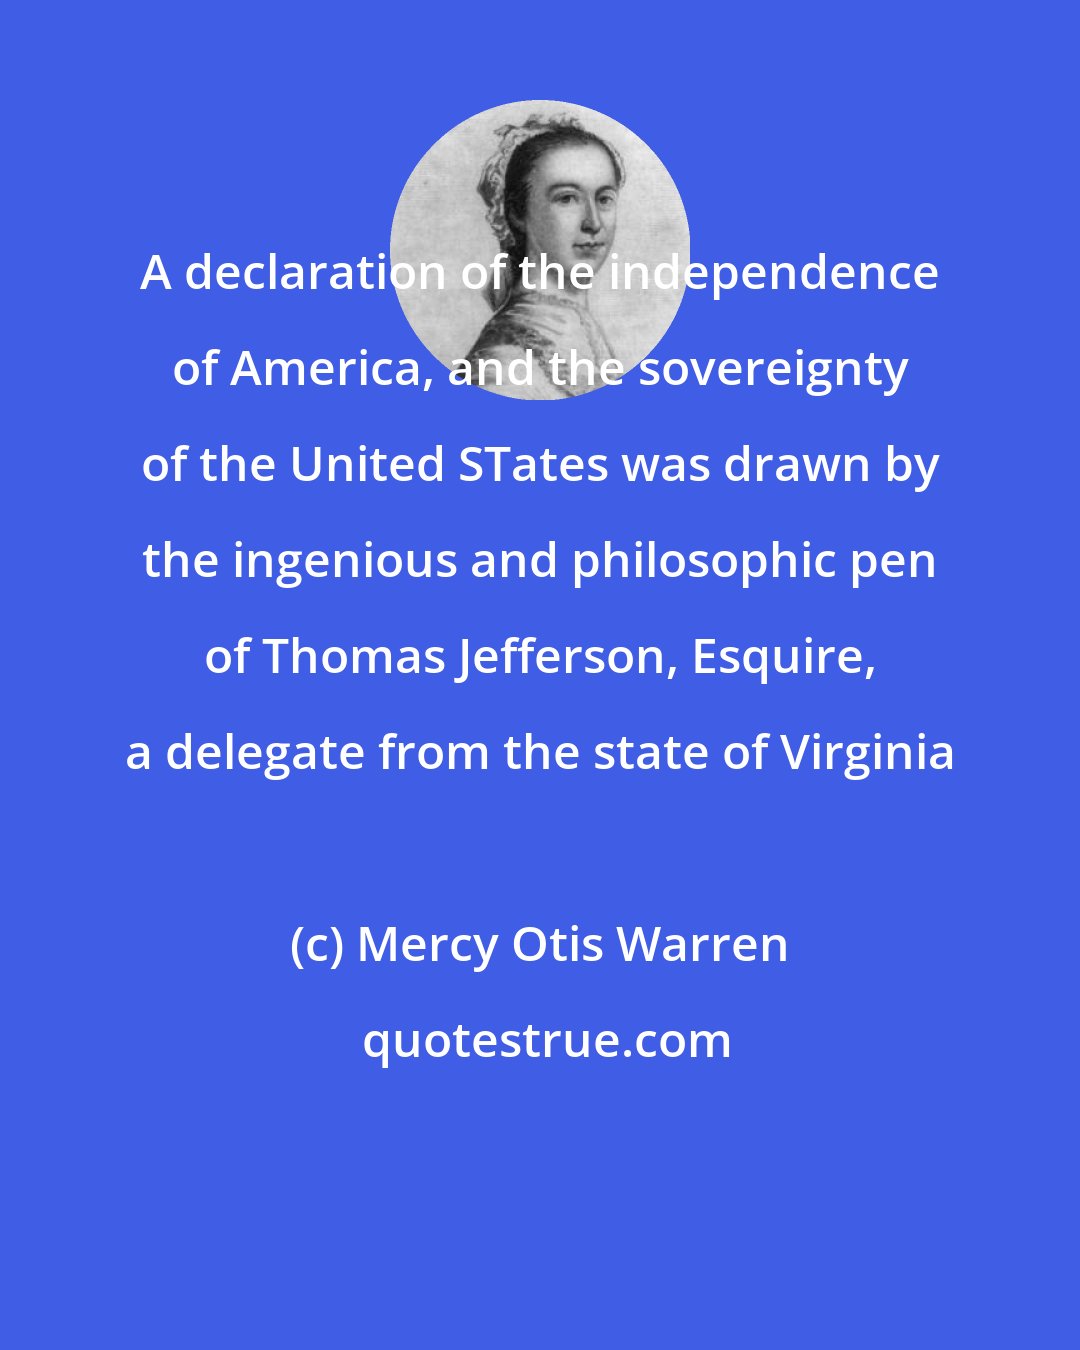 Mercy Otis Warren: A declaration of the independence of America, and the sovereignty of the United STates was drawn by the ingenious and philosophic pen of Thomas Jefferson, Esquire, a delegate from the state of Virginia